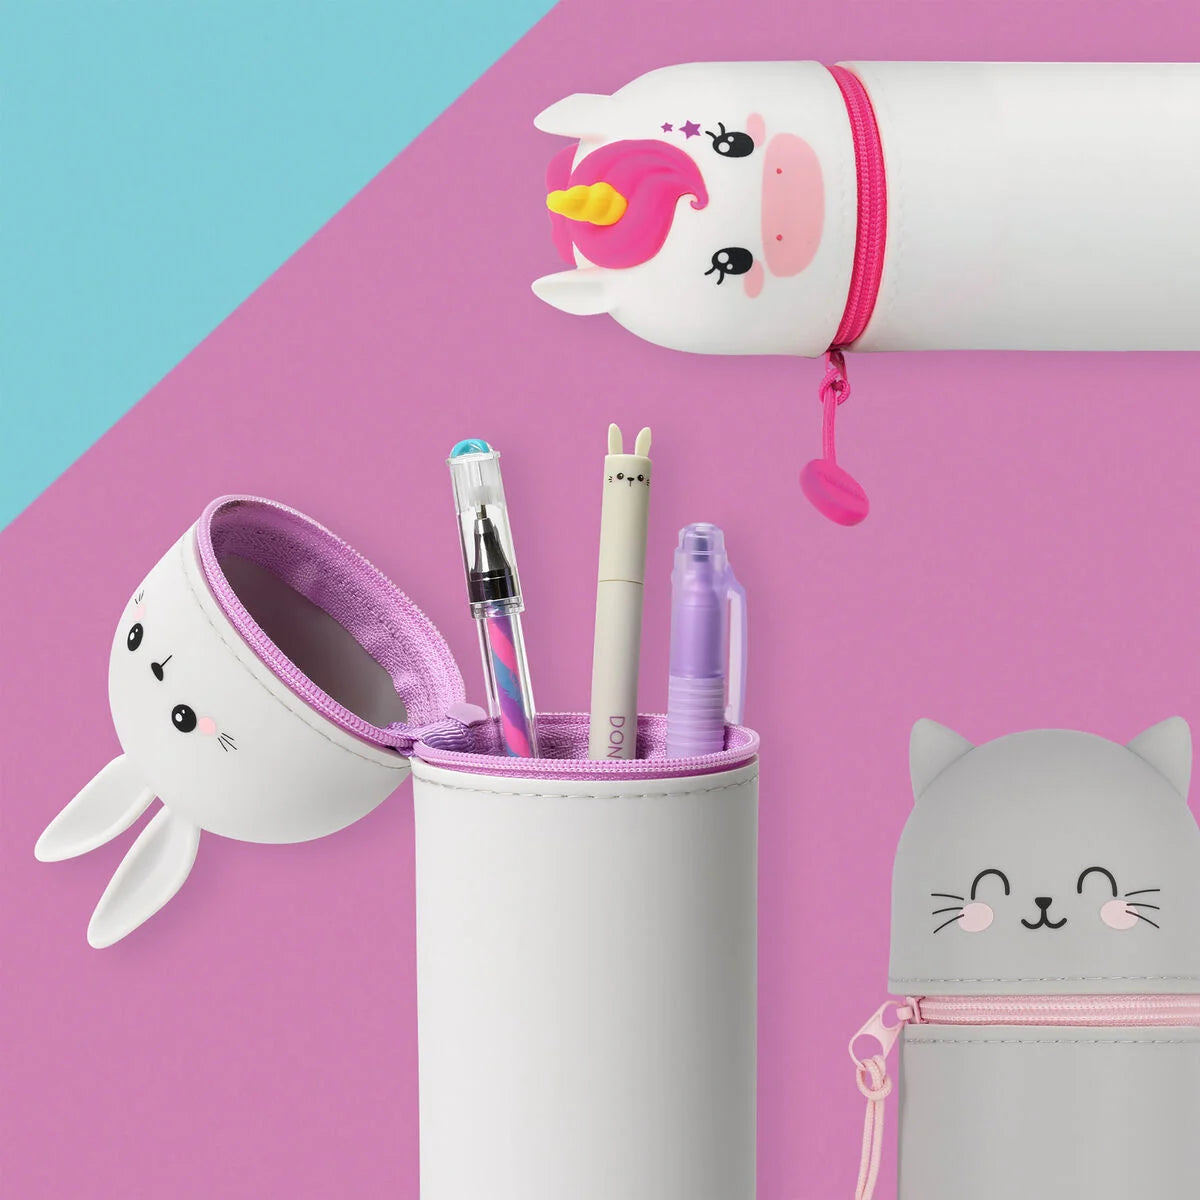 Pencil Case | Legami Kawaii 2-In-1 Soft Silicone Pencil Case Kitty by Weirs of Baggot Street